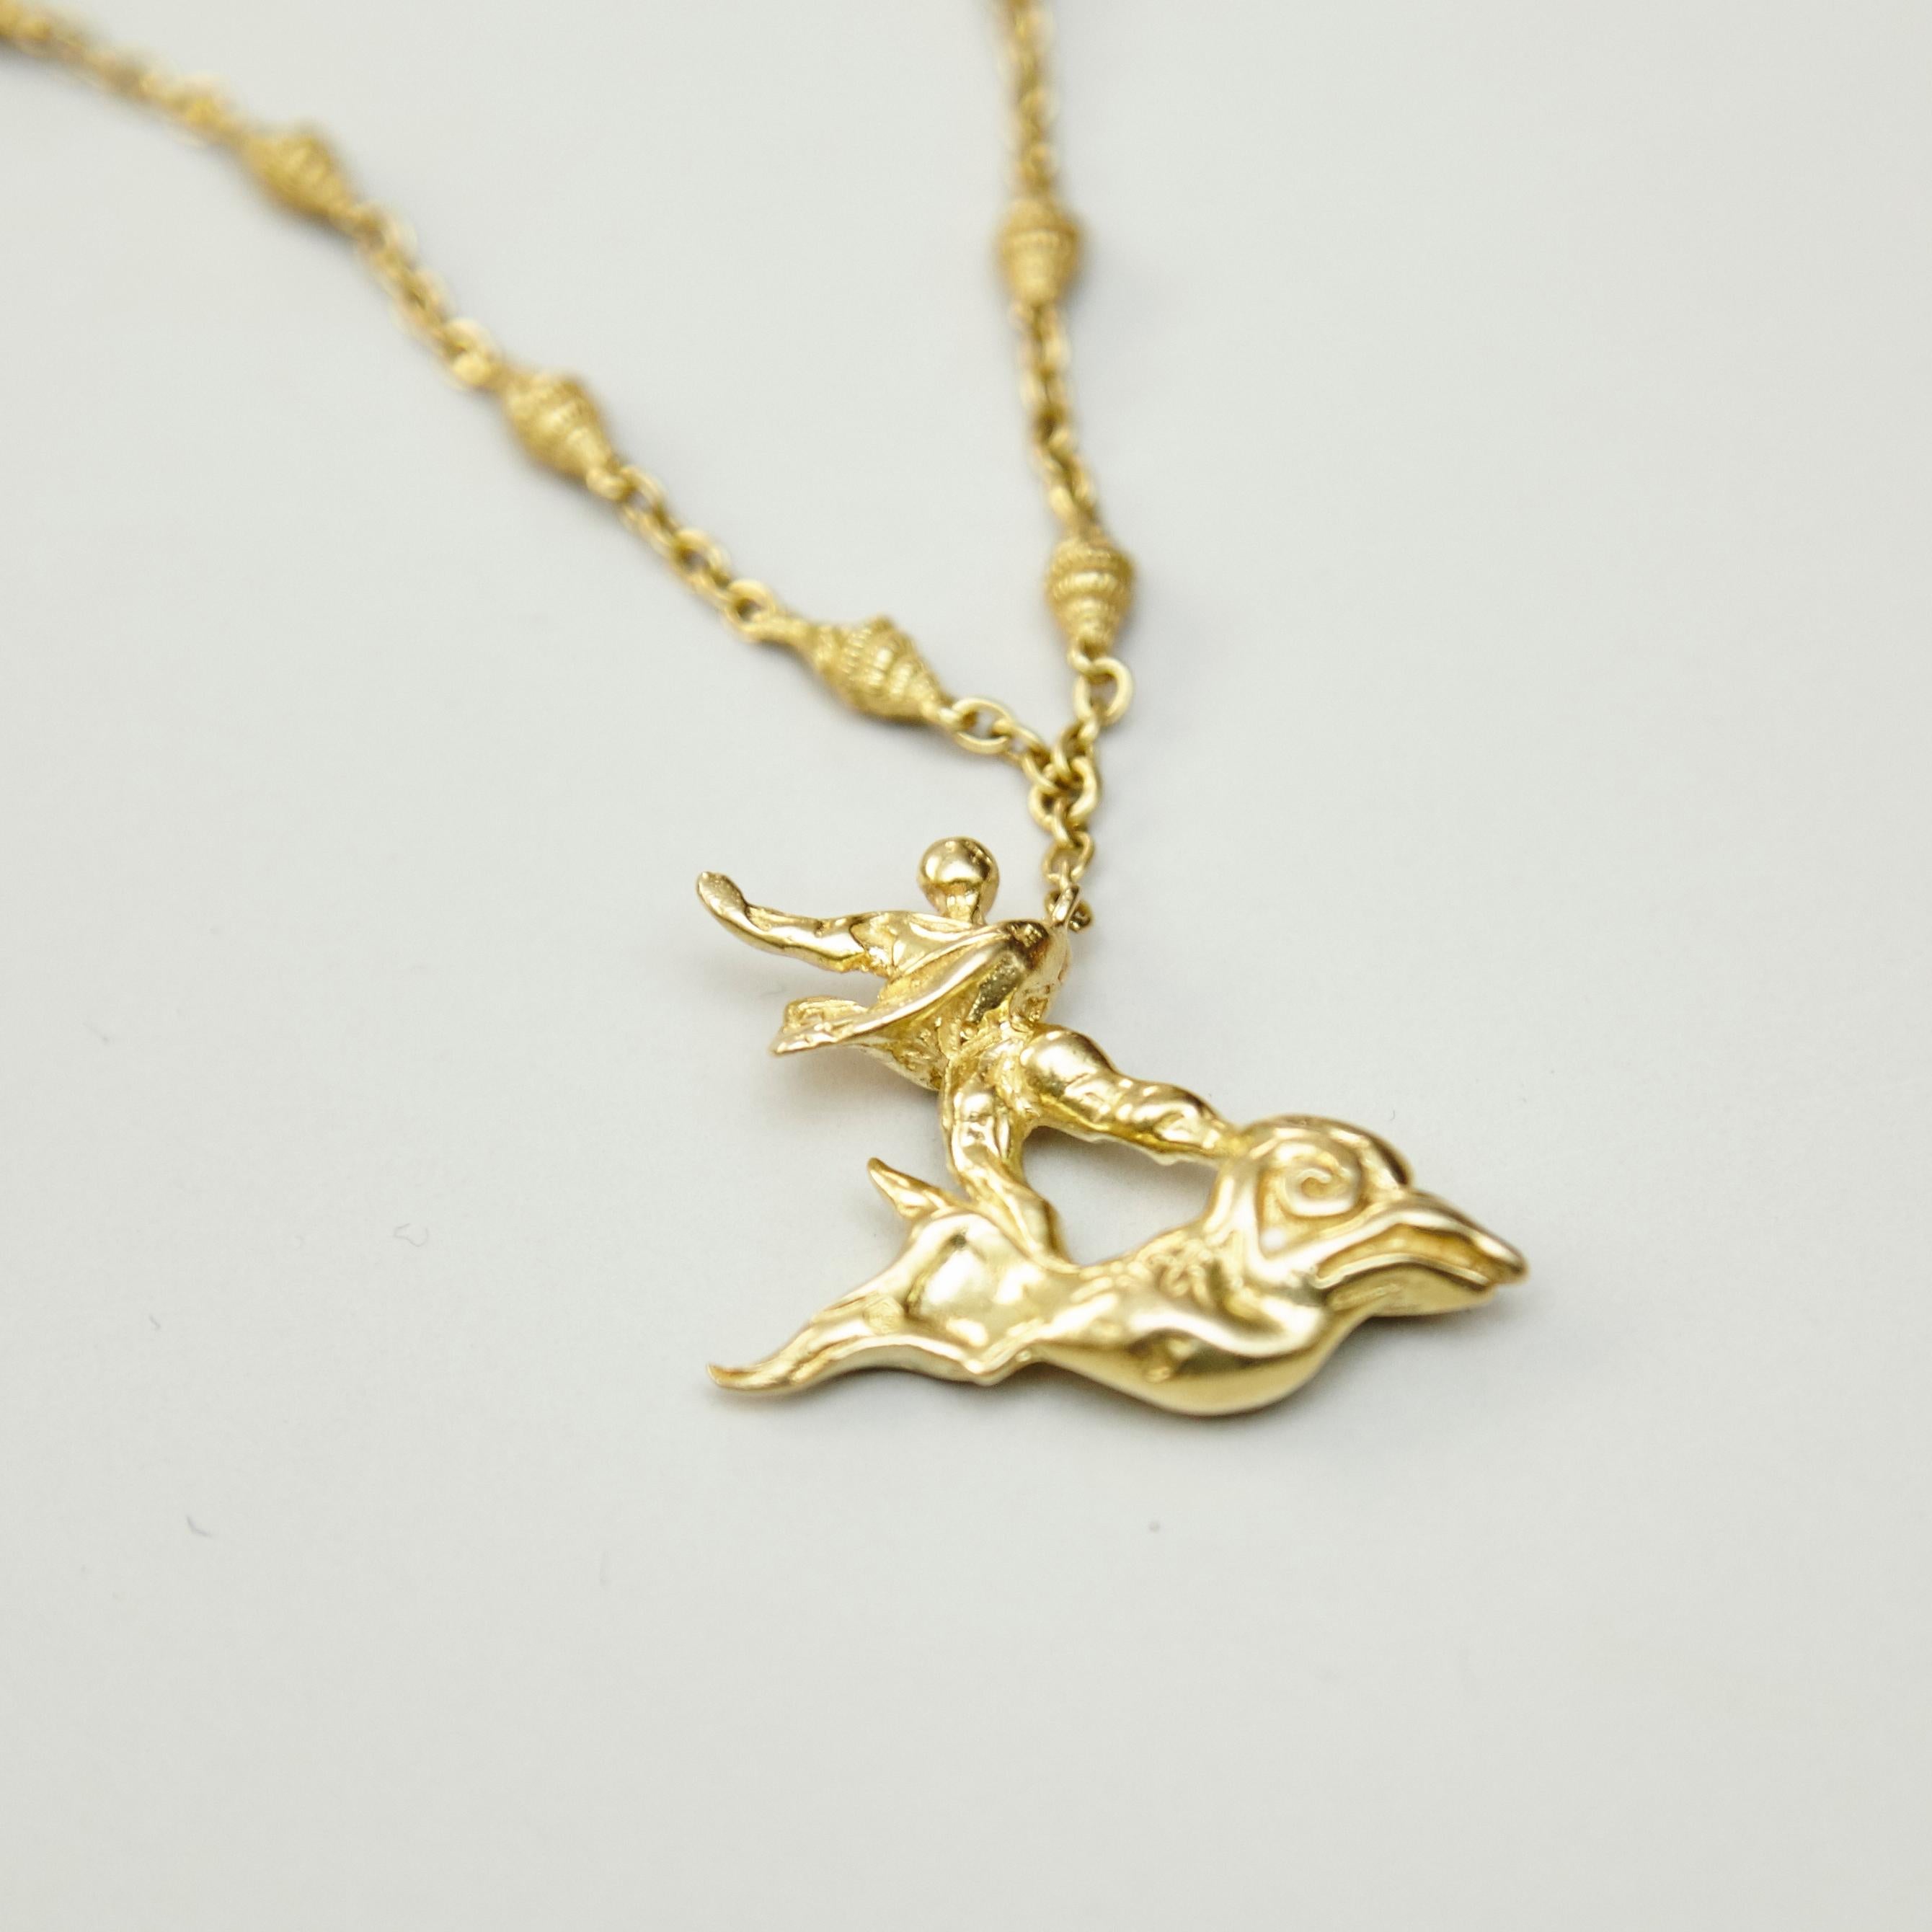 Limited Edition Dalí Gold Necklace and Bracelet 'The Man and the Dolphin' 5